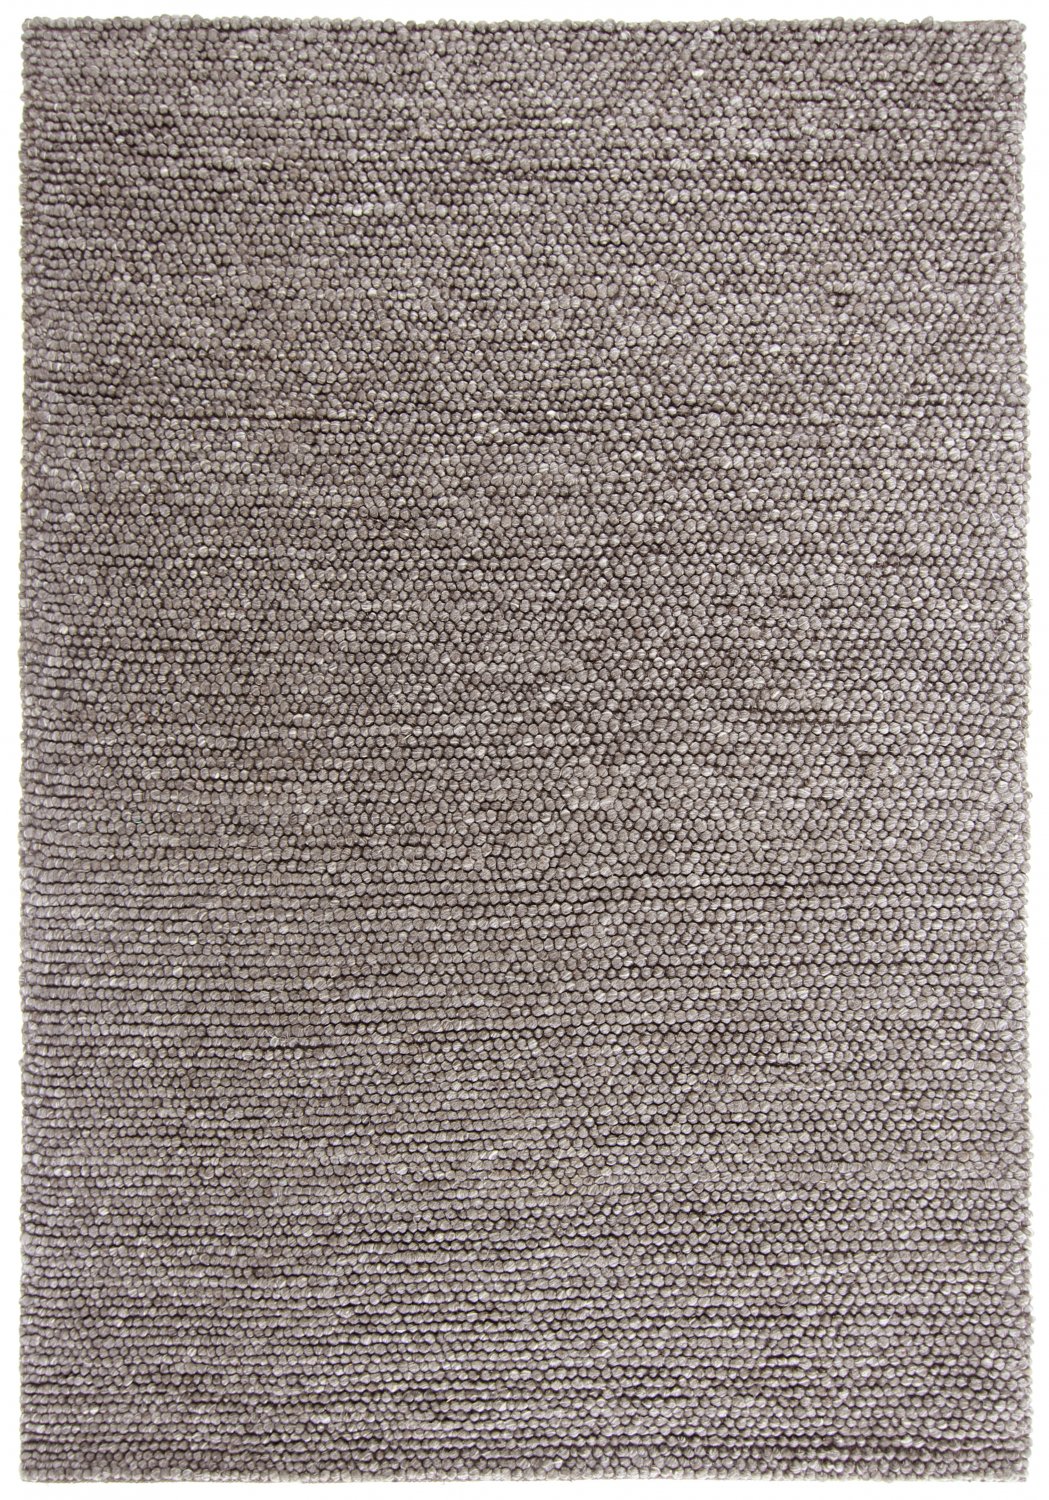 Wool rug - Avafors Wool Bubble (anthracite)